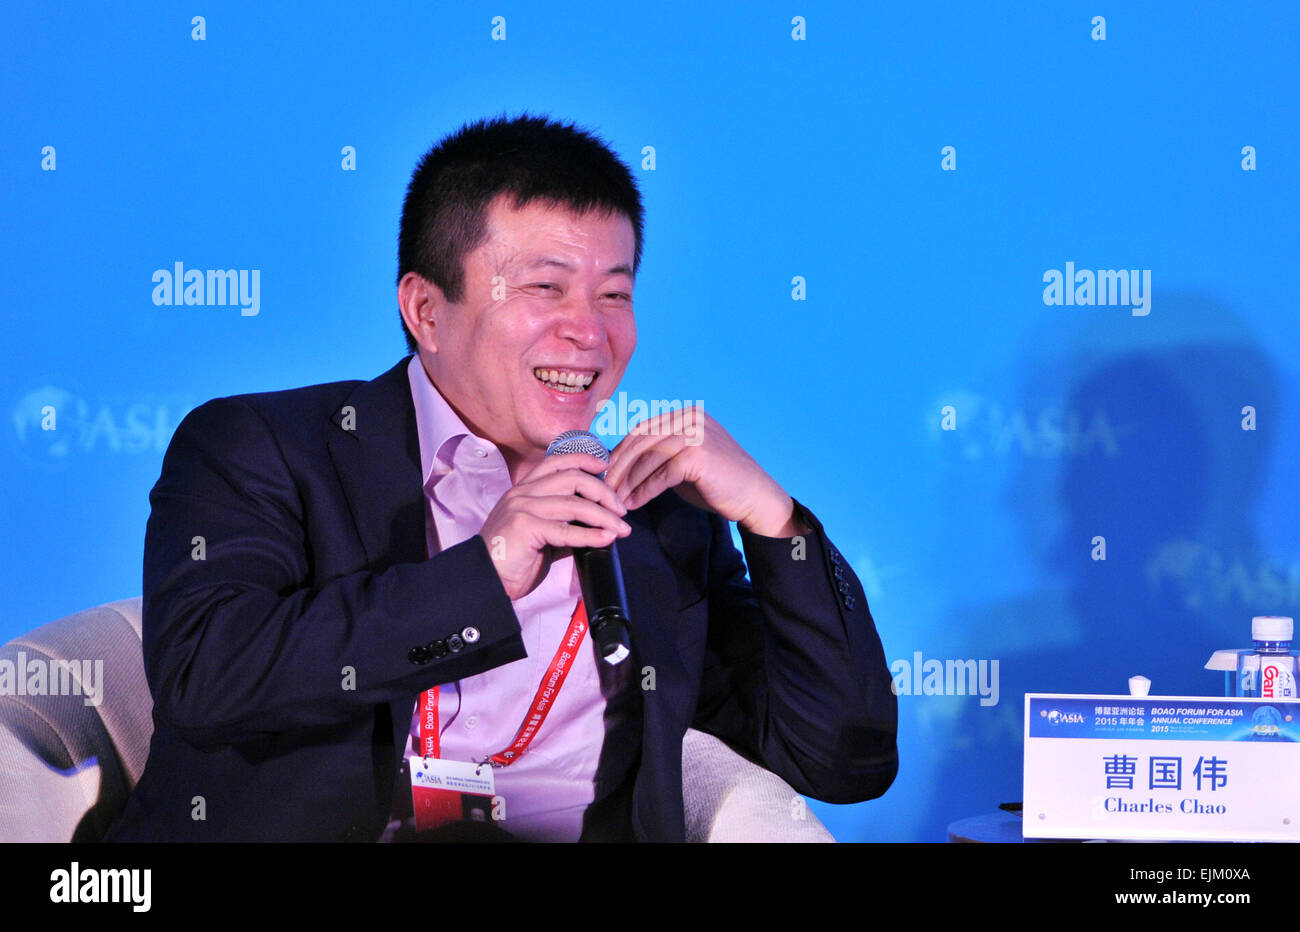 Boao, China's Hainan Province. 29th Mar, 2015. Charles Chao, chairman and CEO of SINA Corporation, speaks at the sub-forum with the theme 'Doing Business the Internet Way' during the 2015 Boao Forum for Asia (BFA) in Boao, south China's Hainan Province, March 29, 2015. © Yang Guanyu/Xinhua/Alamy Live News Stock Photo